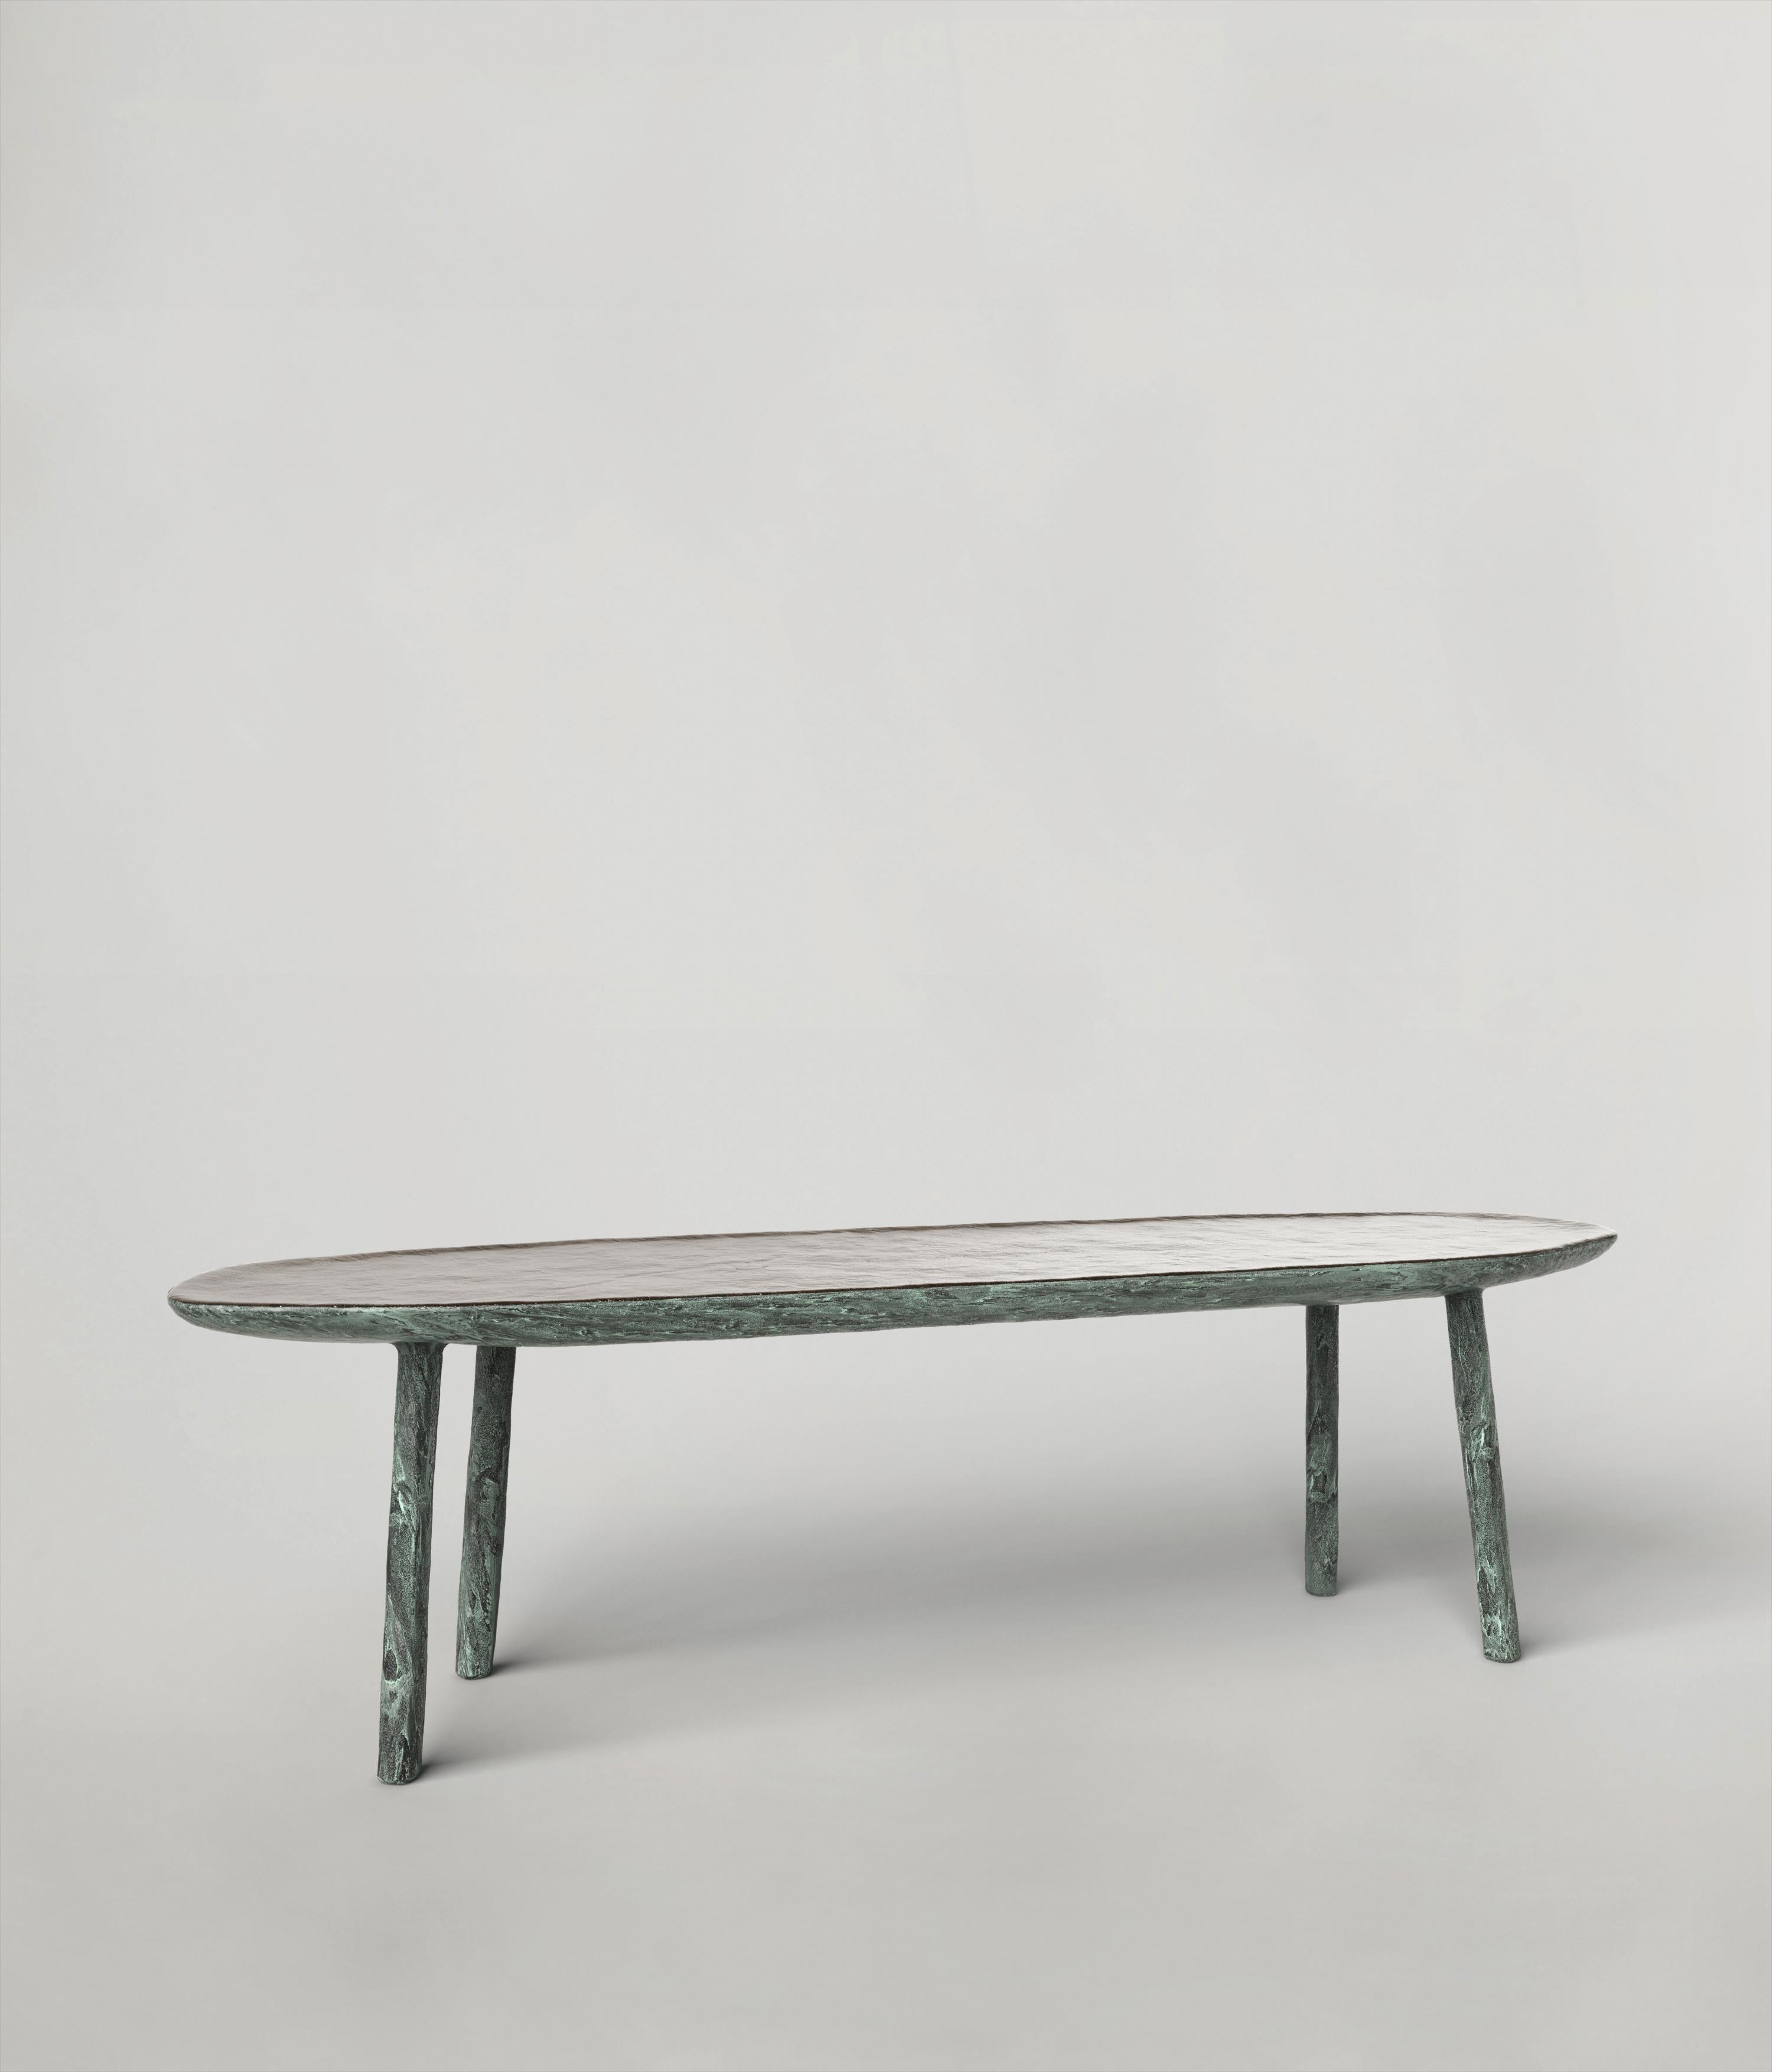 Comma V2 bench by Edizione Limitata
Limited edition of 150 pieces. Signed and numbered.
Dimensions: D130 x W40 x H90 cm
Materials: green patina bronze

Comma is a 21st century collection of seatings made by Italian artisans in bronze with a